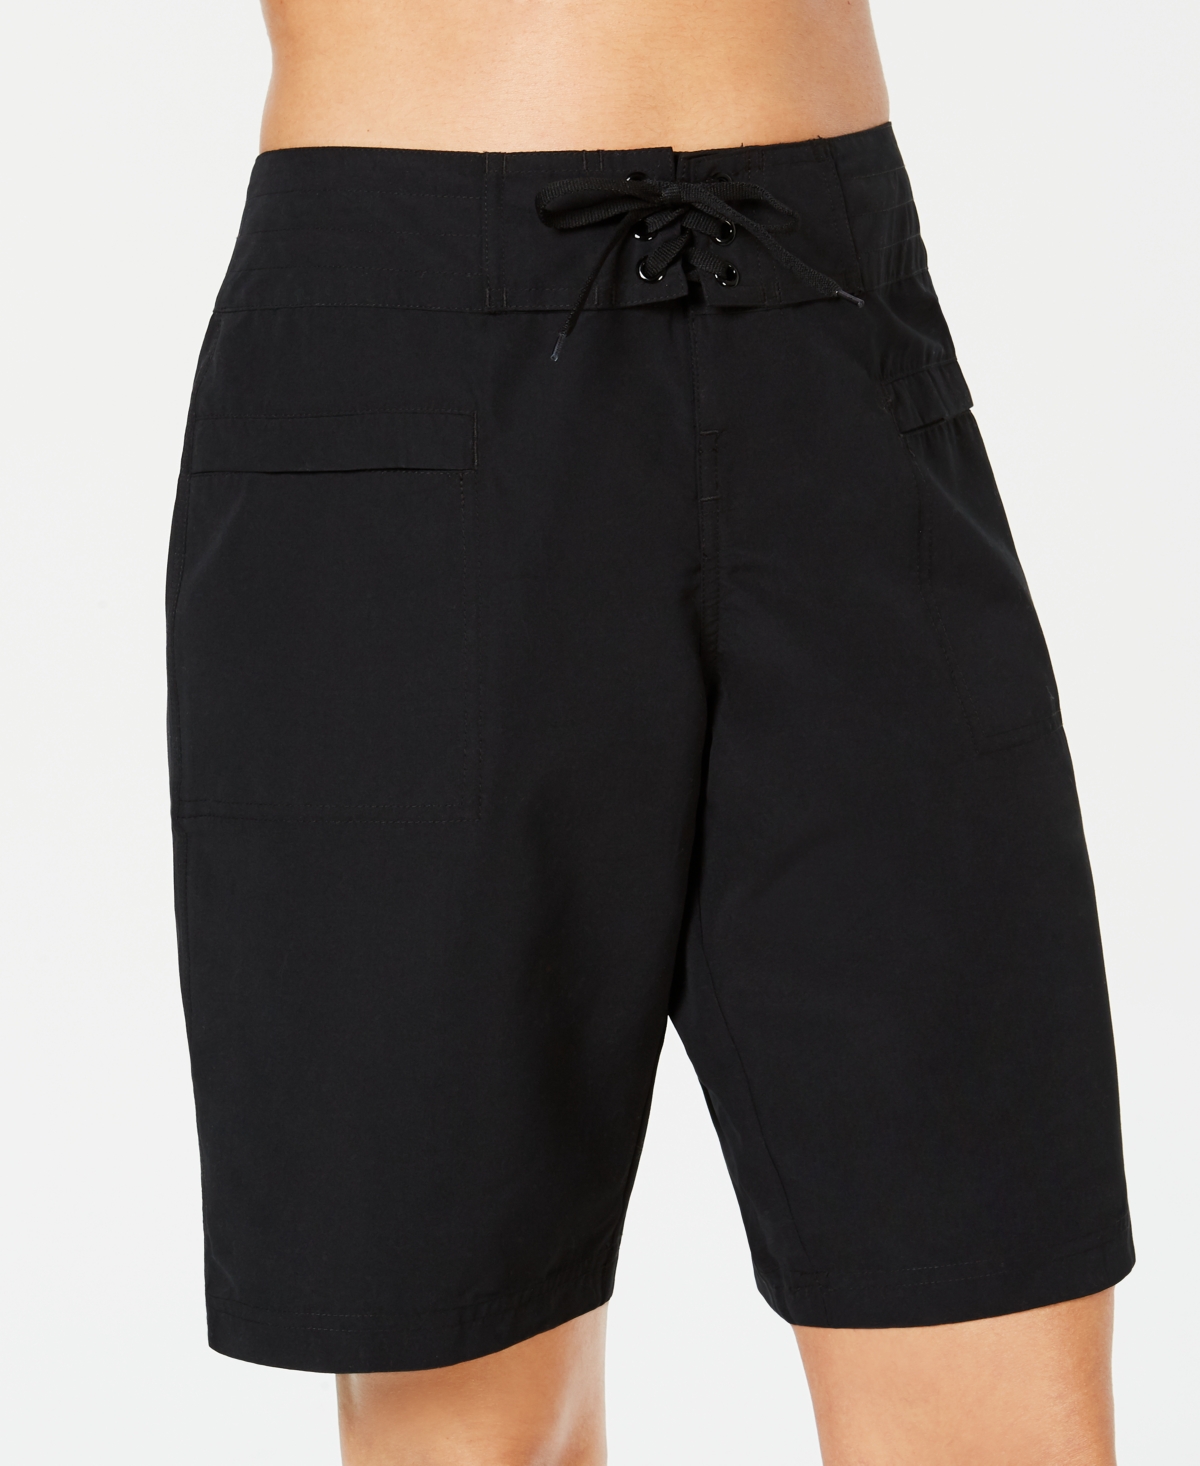 6" Board Shorts, Created for Macy's - Black